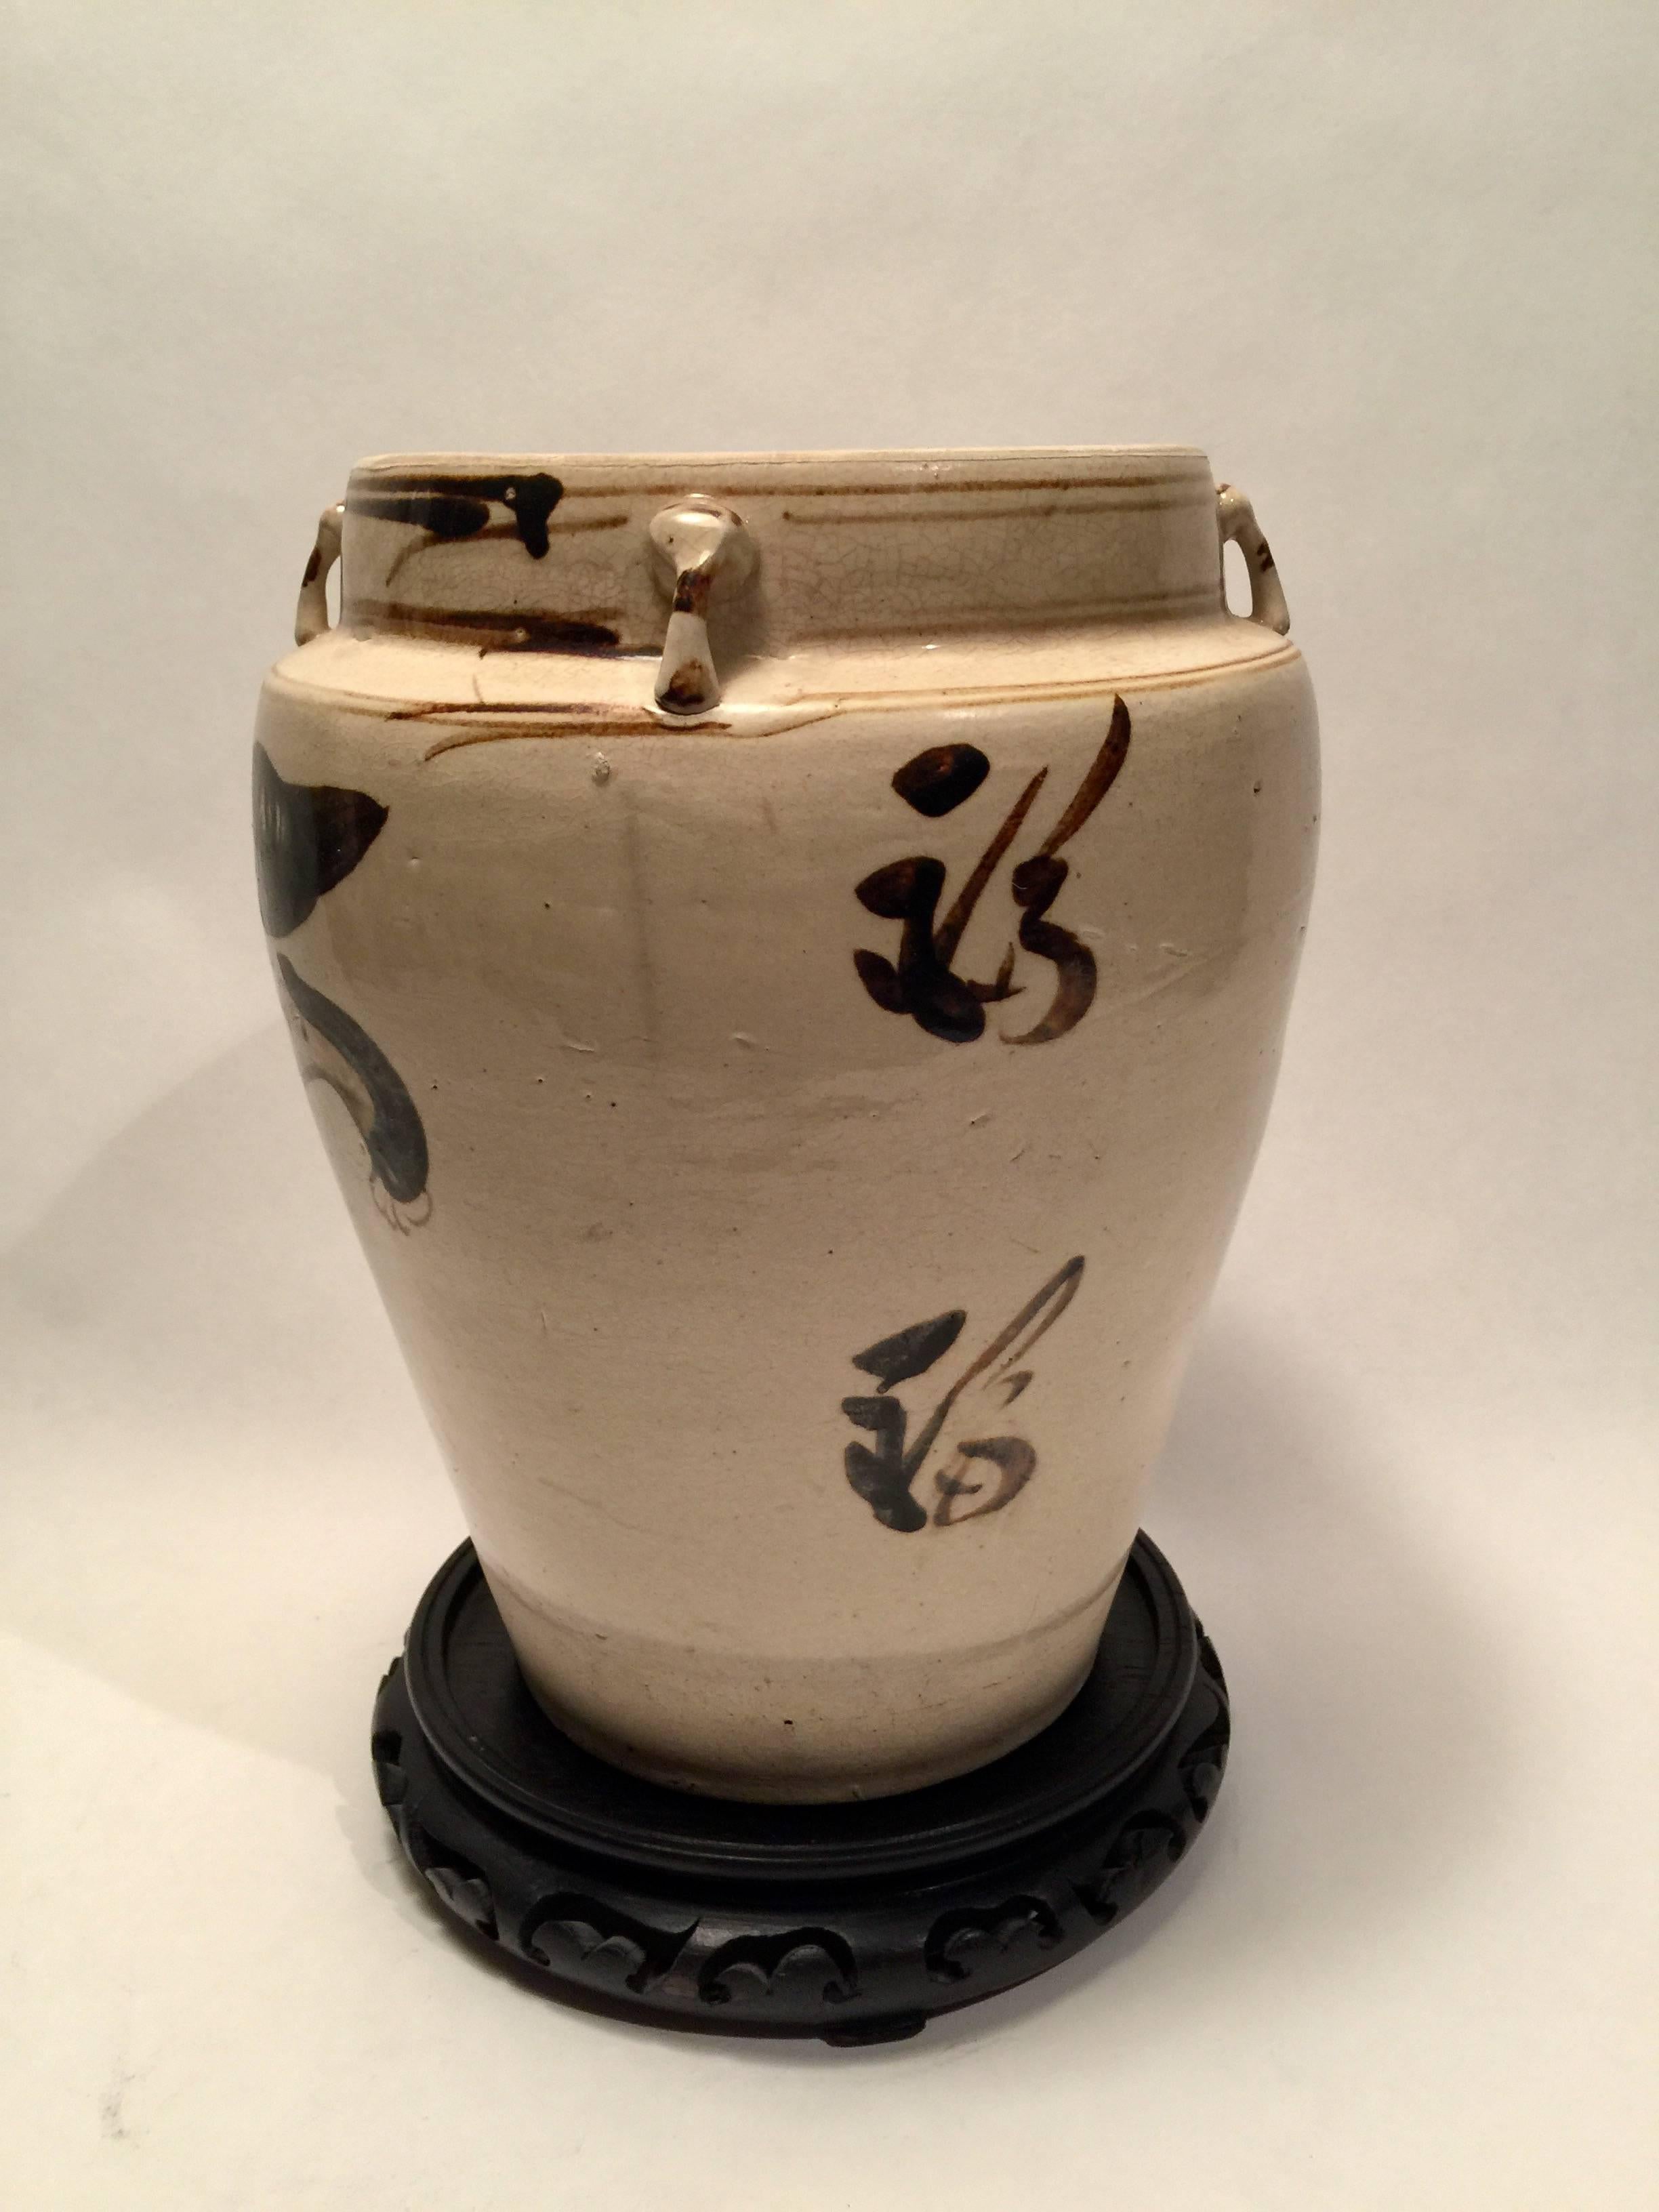 The ovoid body of the vase is glazed with a translucent cream crackle and features a boldly painted Kylin (lion) in chocolate brown glaze. Loop handles are applied to the neck. Late Yuan or early Ming dynasty.